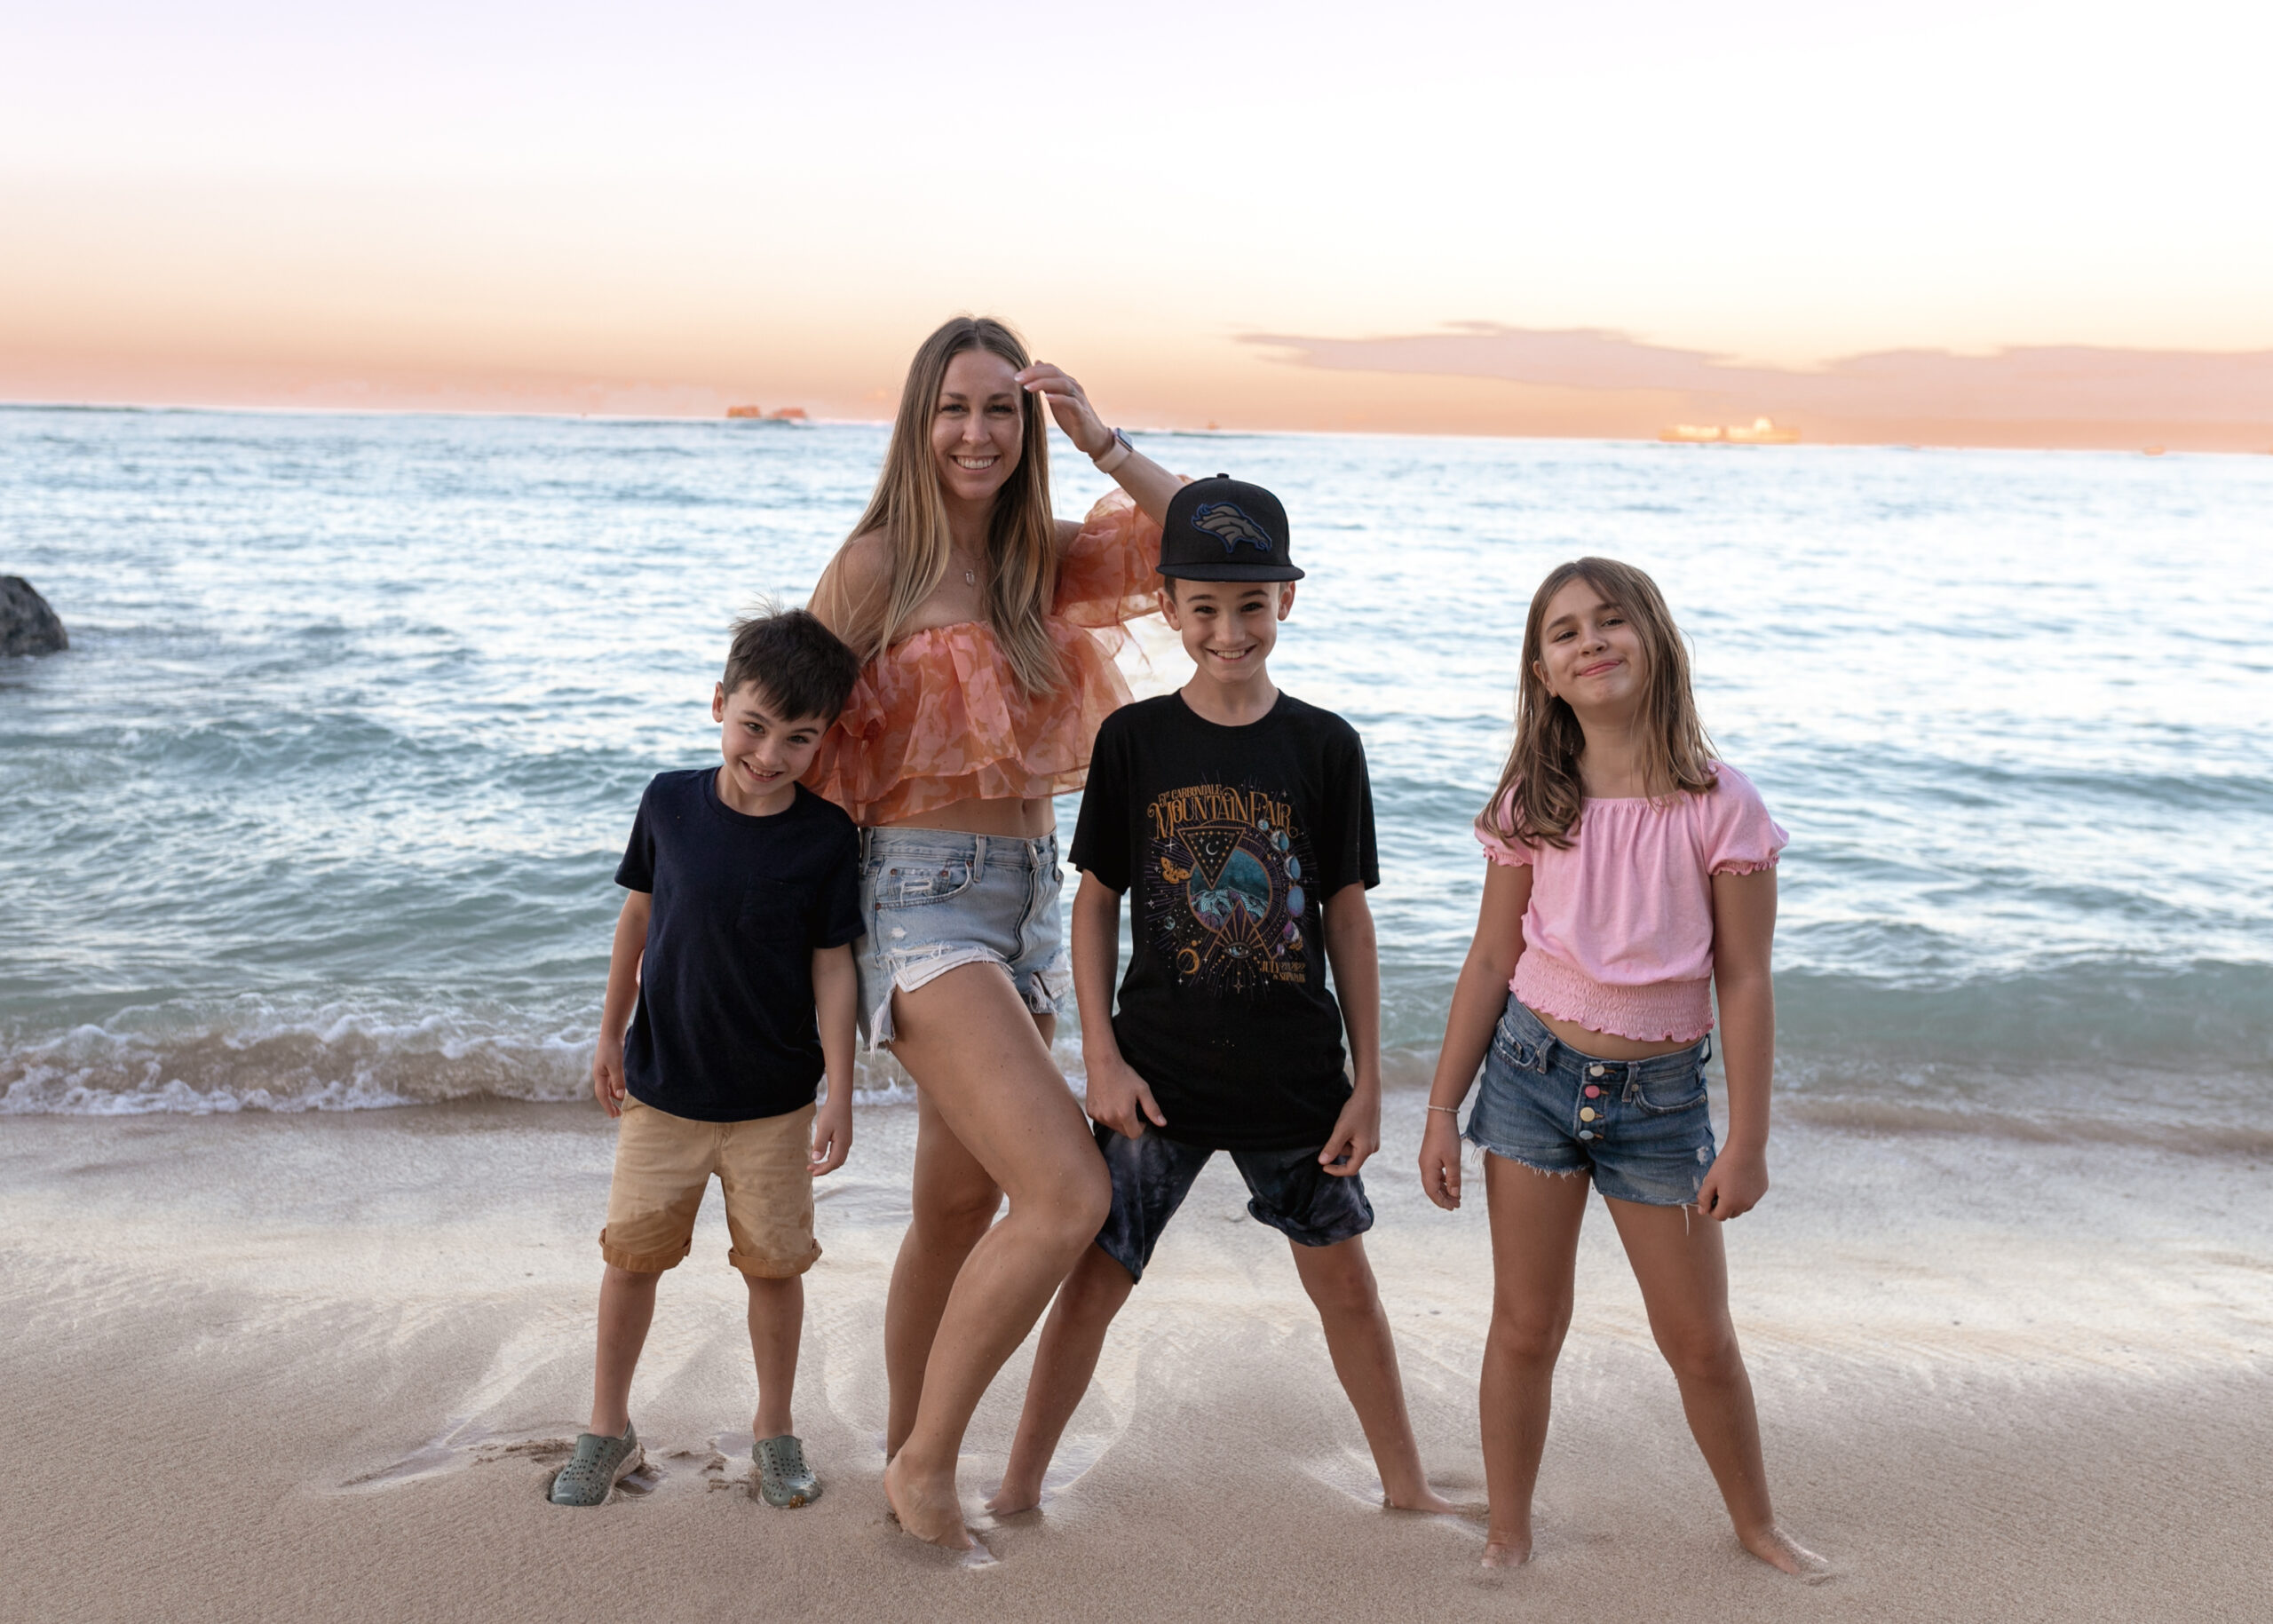 sunrise by the beach in Oahu, Hawaii with me (mom) and my three kids